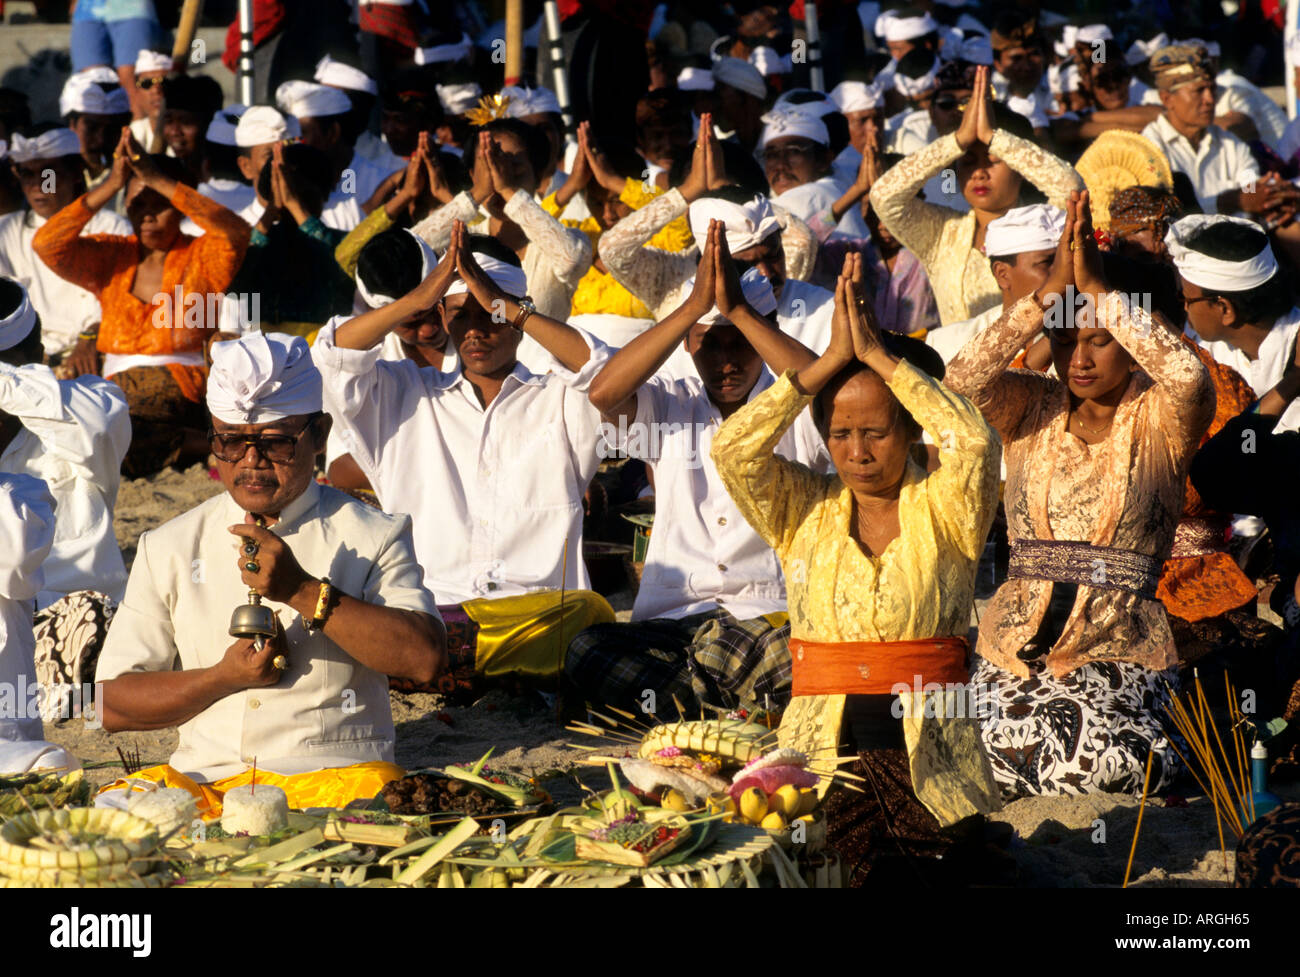 Kuta Beach, Ceremony Bali funereal cremation Balinese funeral procession, faith offering, Hindu universe, crowd, group, people, men, women, Indonesia, Stock Photo